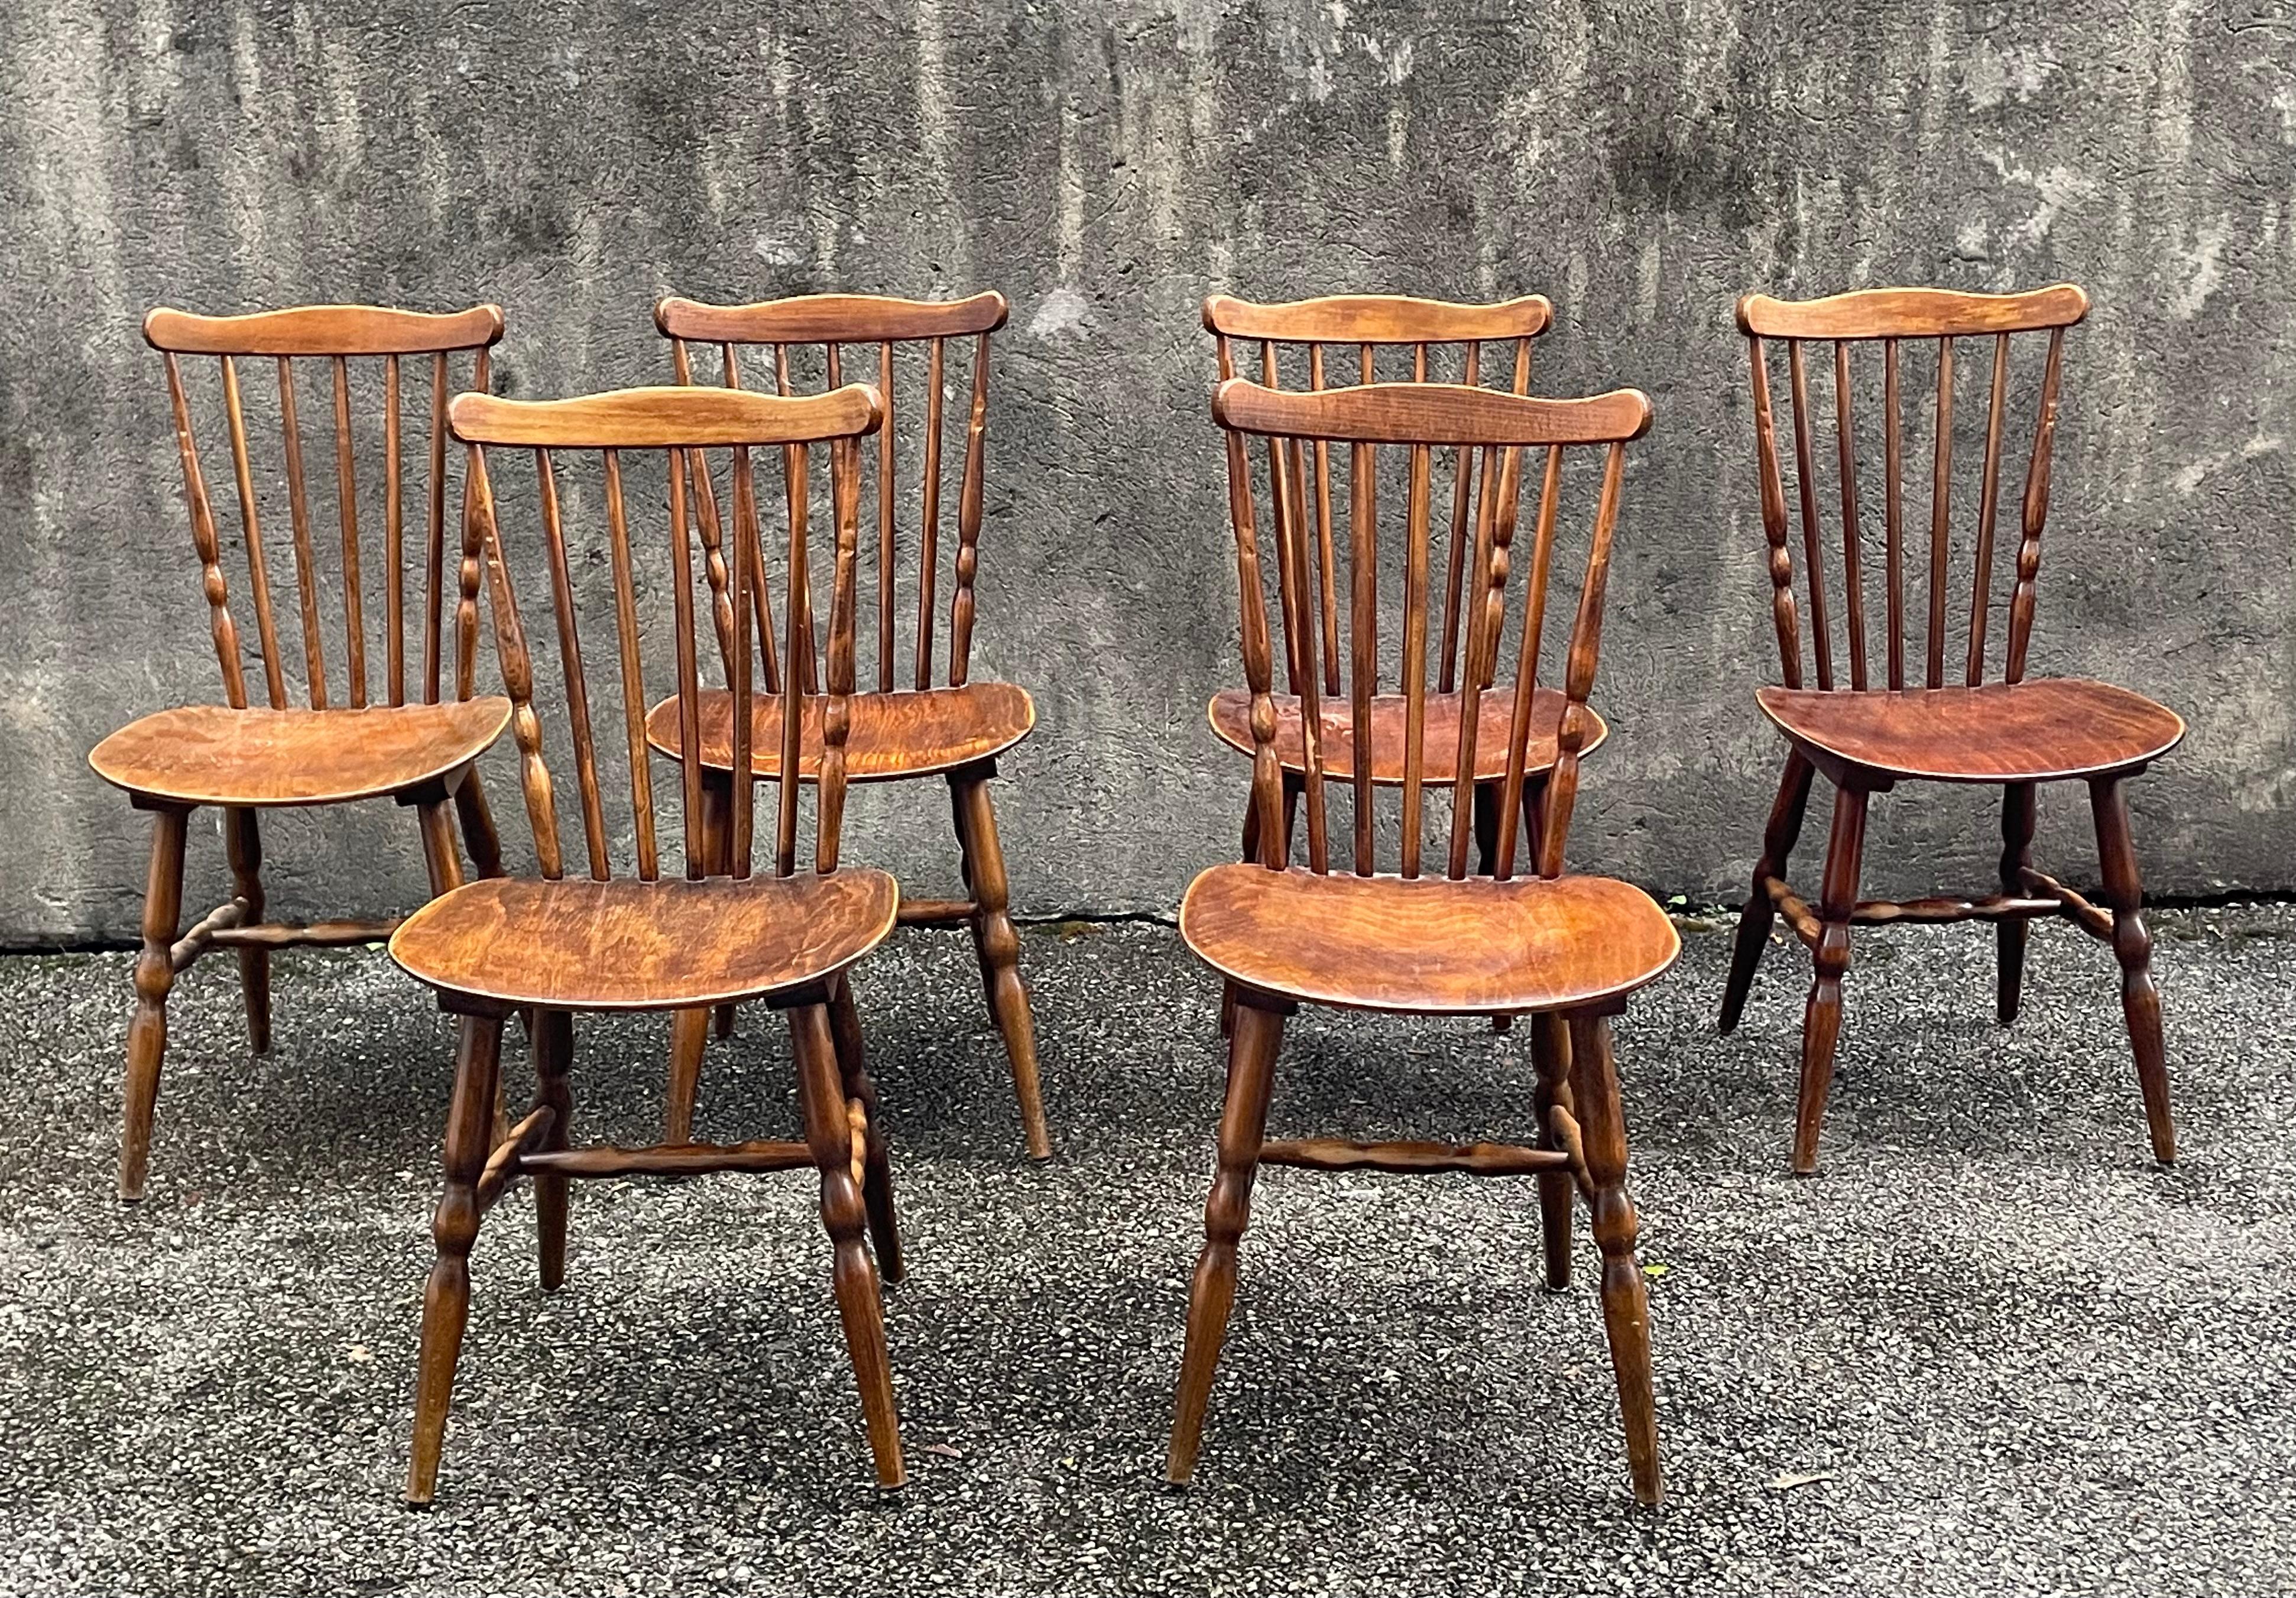 Set of 6 Baumann bistro chairs. There is no stamp but these chairs come from the same factories. Not all were stamped. Rare traces of use (photos) which give the charm and authenticity of these chairs. Dimensions: l42 x p40 x h86 cm. Seat height